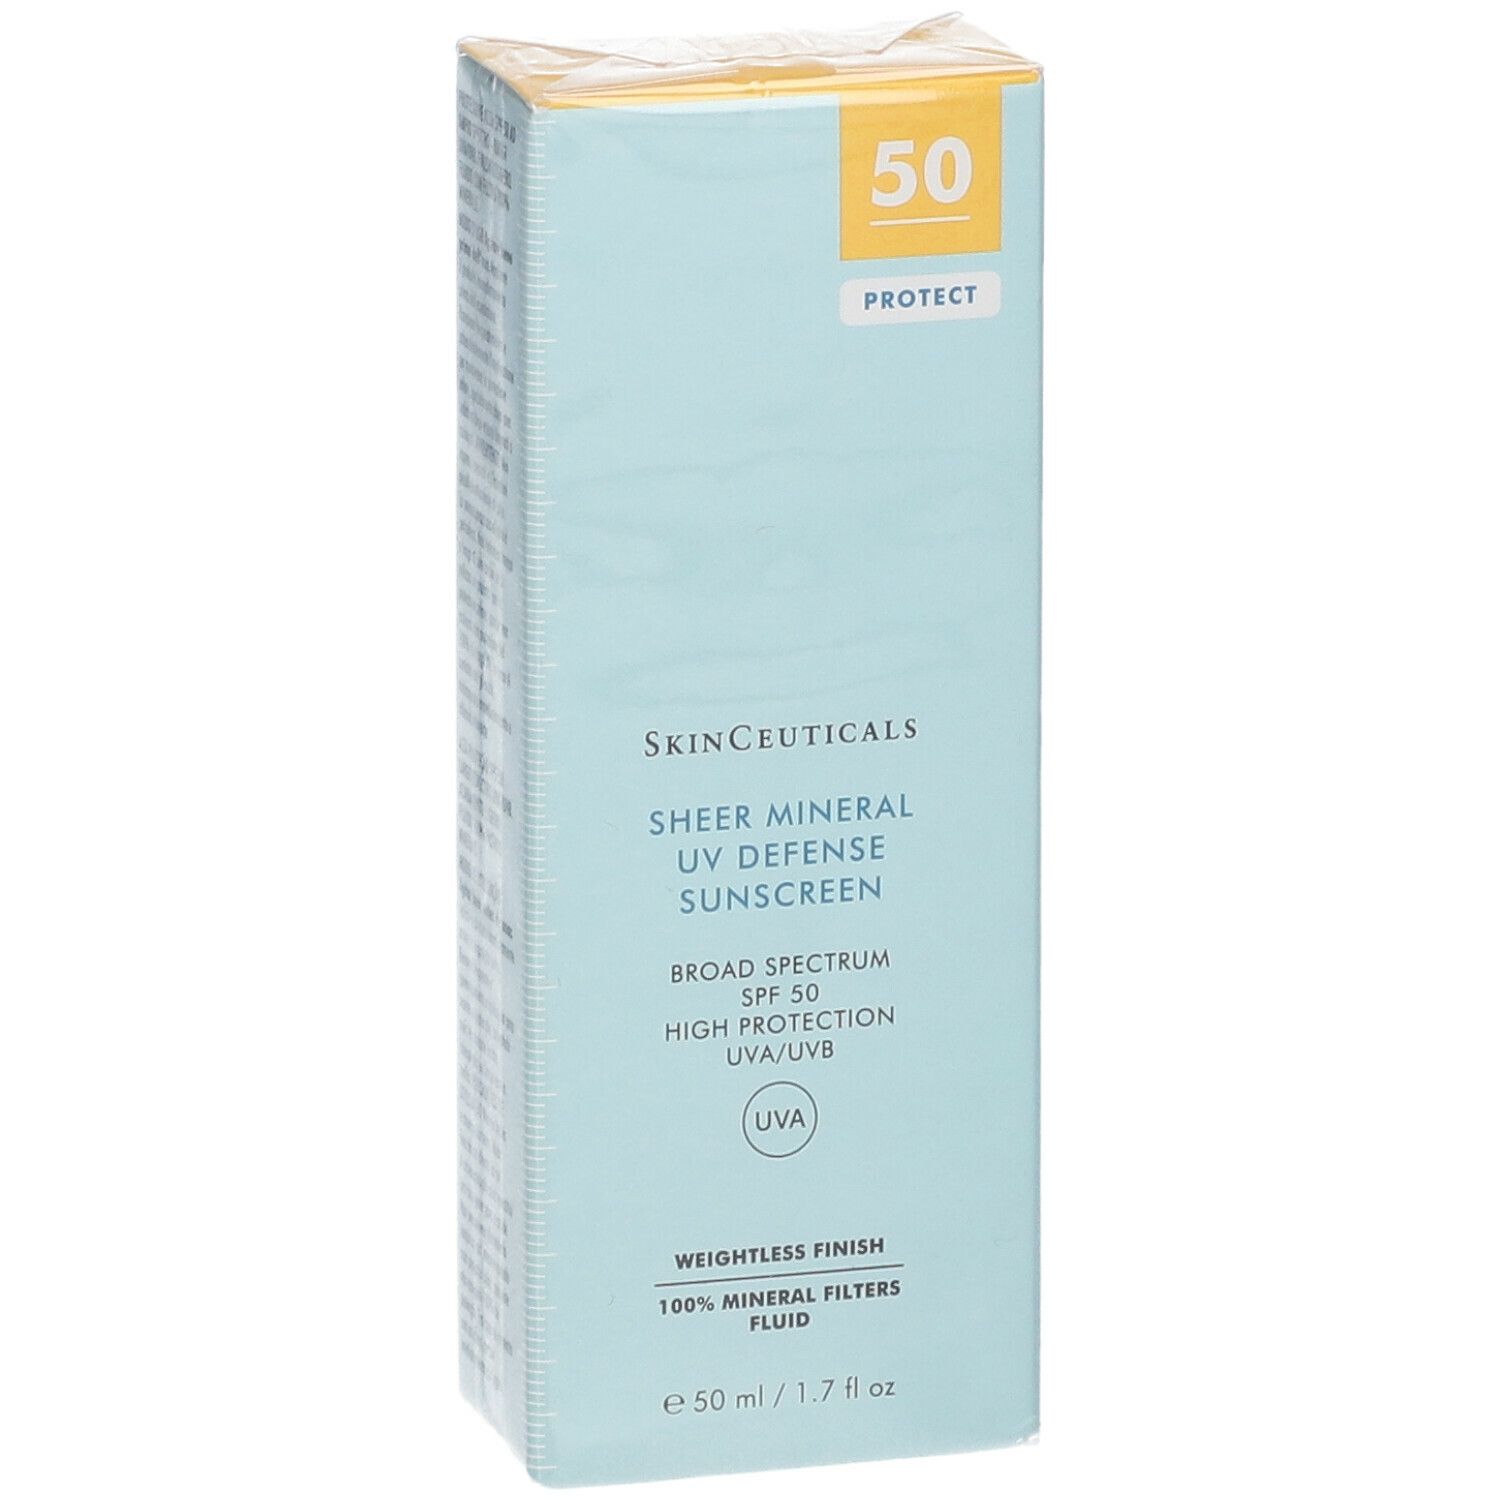 Skinceuticals SHEER MINERAL UV DEFENSE SPF 50 Protection solaire visage minérale SPF 50 50ml